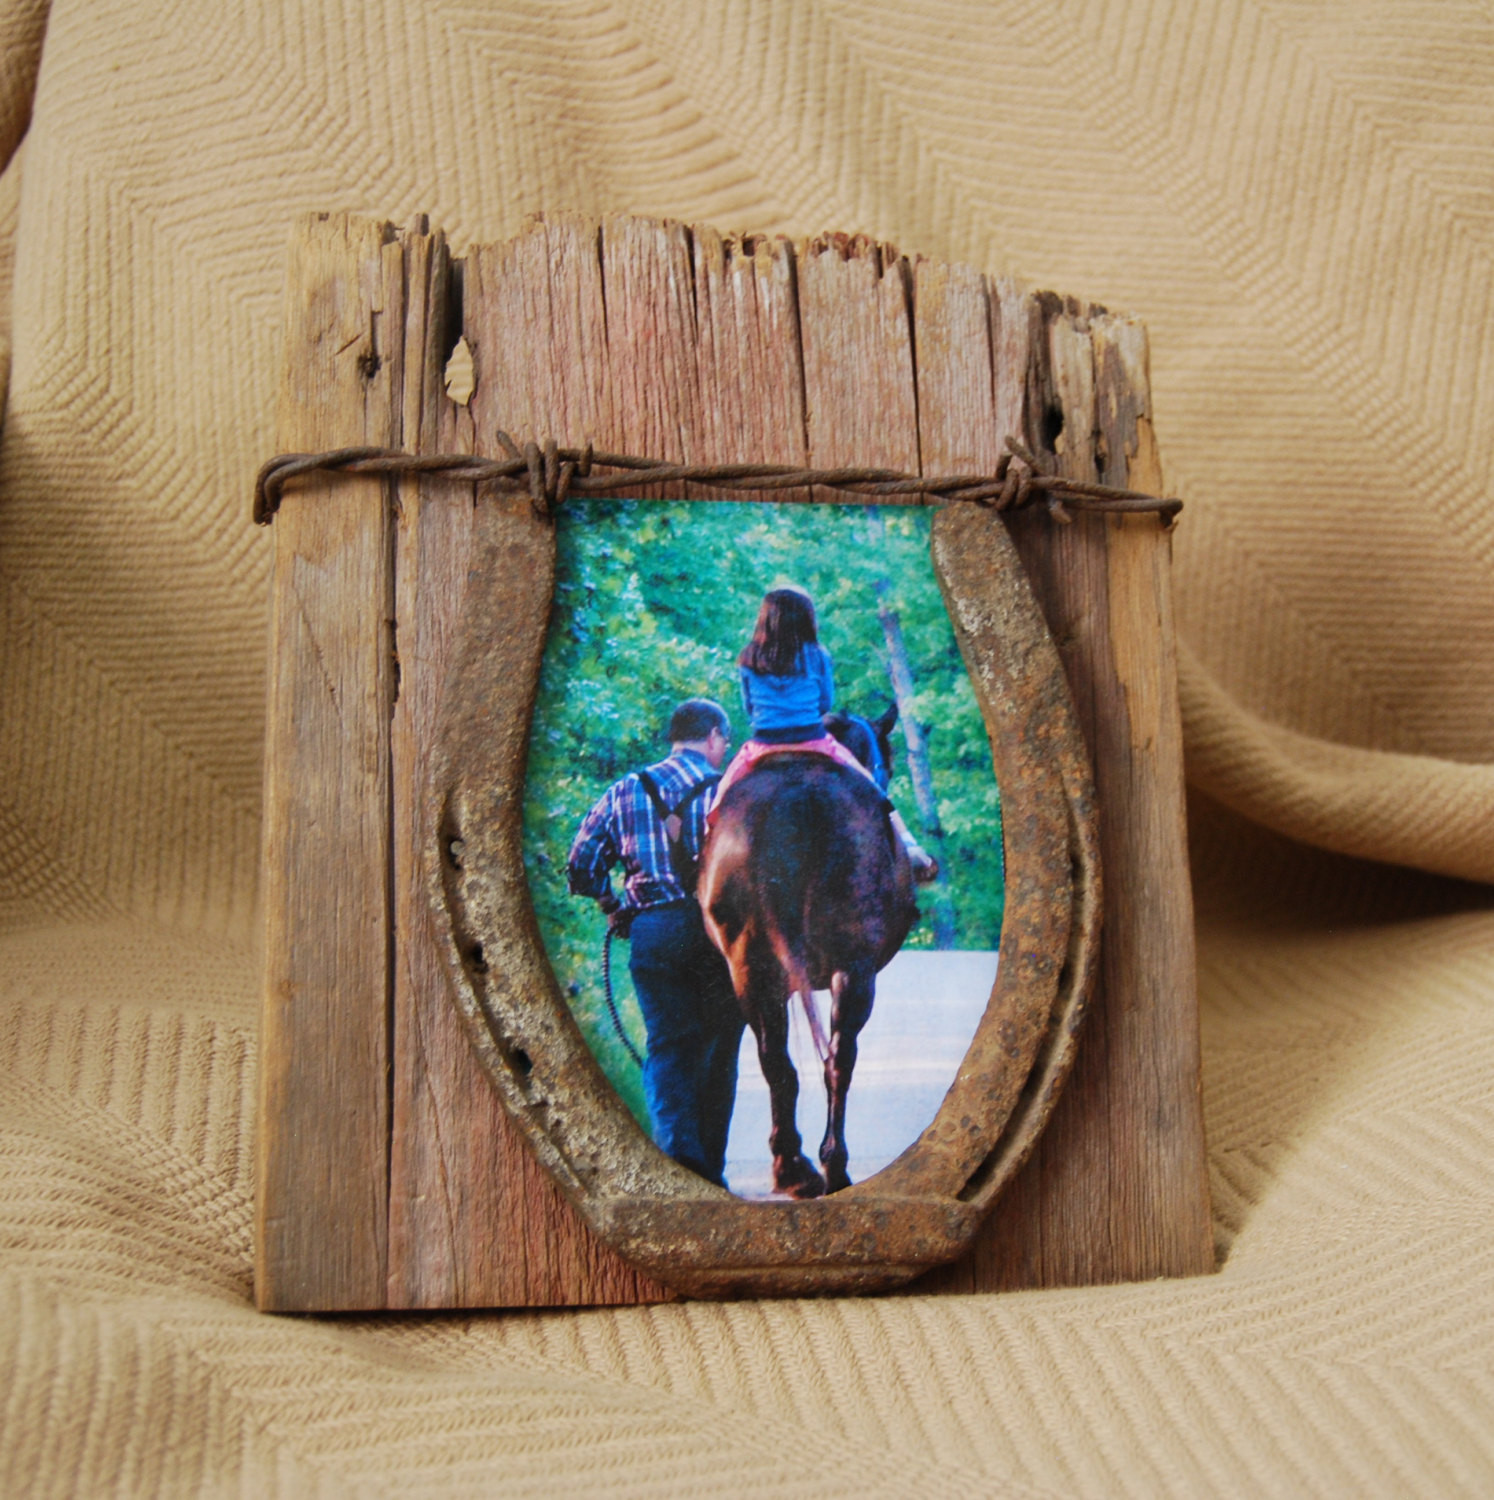 Barnwood Craft Ideas
 Reclaimed barn wood photo and horse shoe by